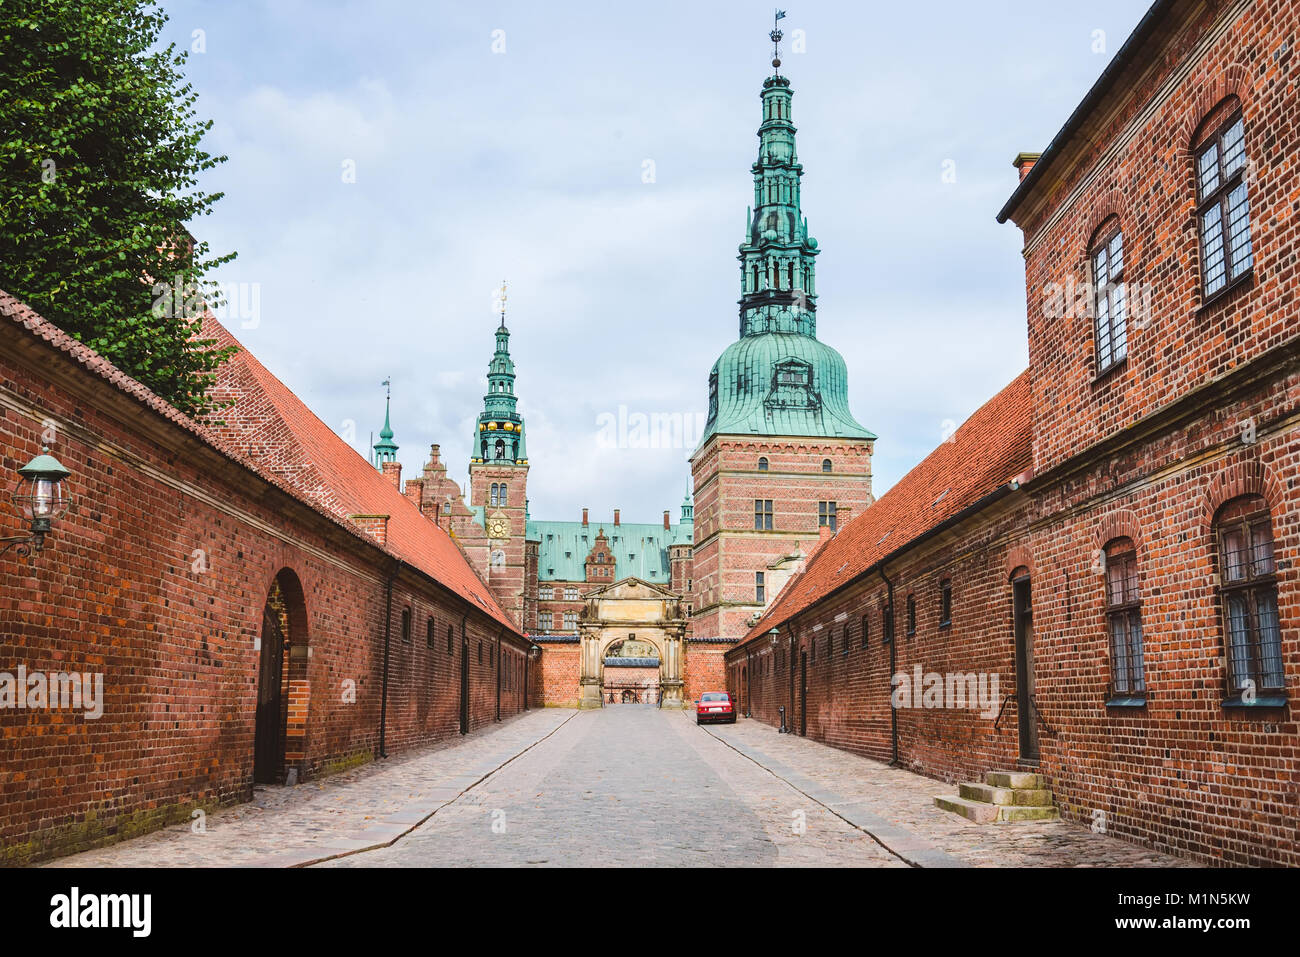 Entrance to Frederiksborg castle in Copenhagen, Denmark - September, 24th, 2015. Red brick fortress wall and green copper spiels of towers of renaissa Stock Photo